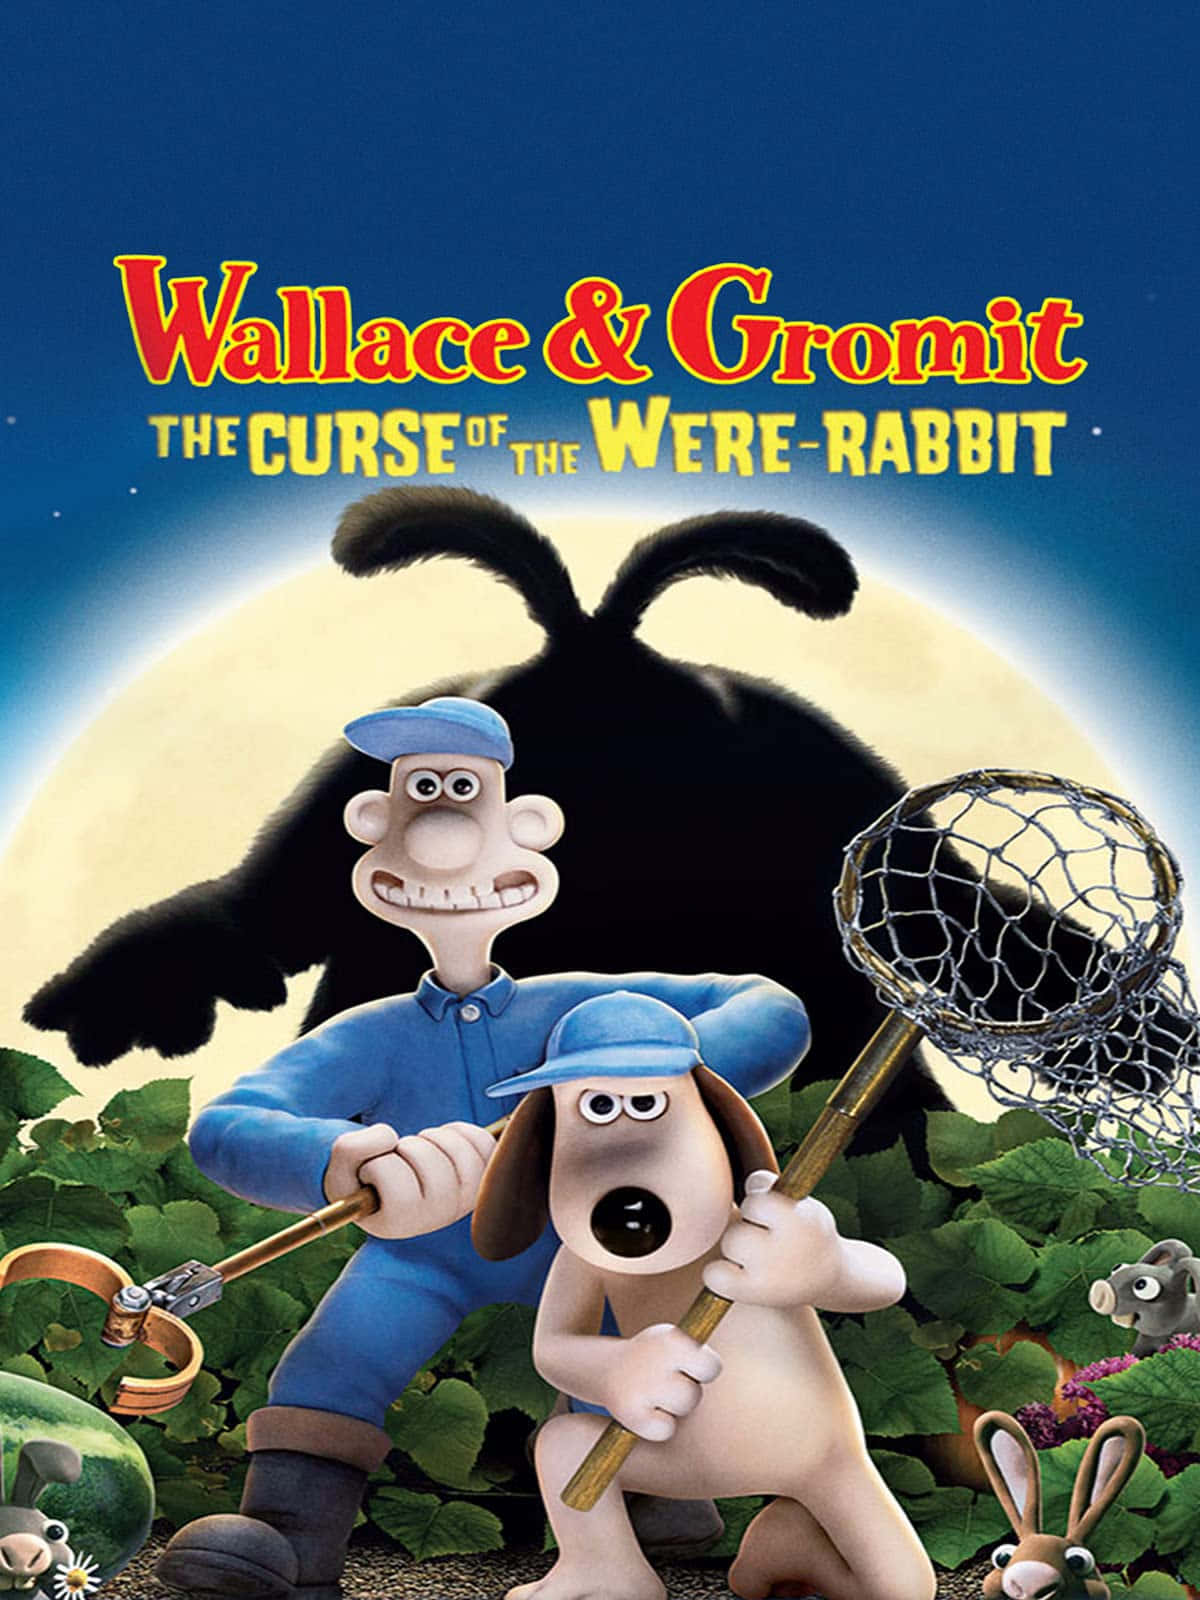 Wallace & Gromit The Curse Of The Were-rabbit Movie Poster Wallpaper